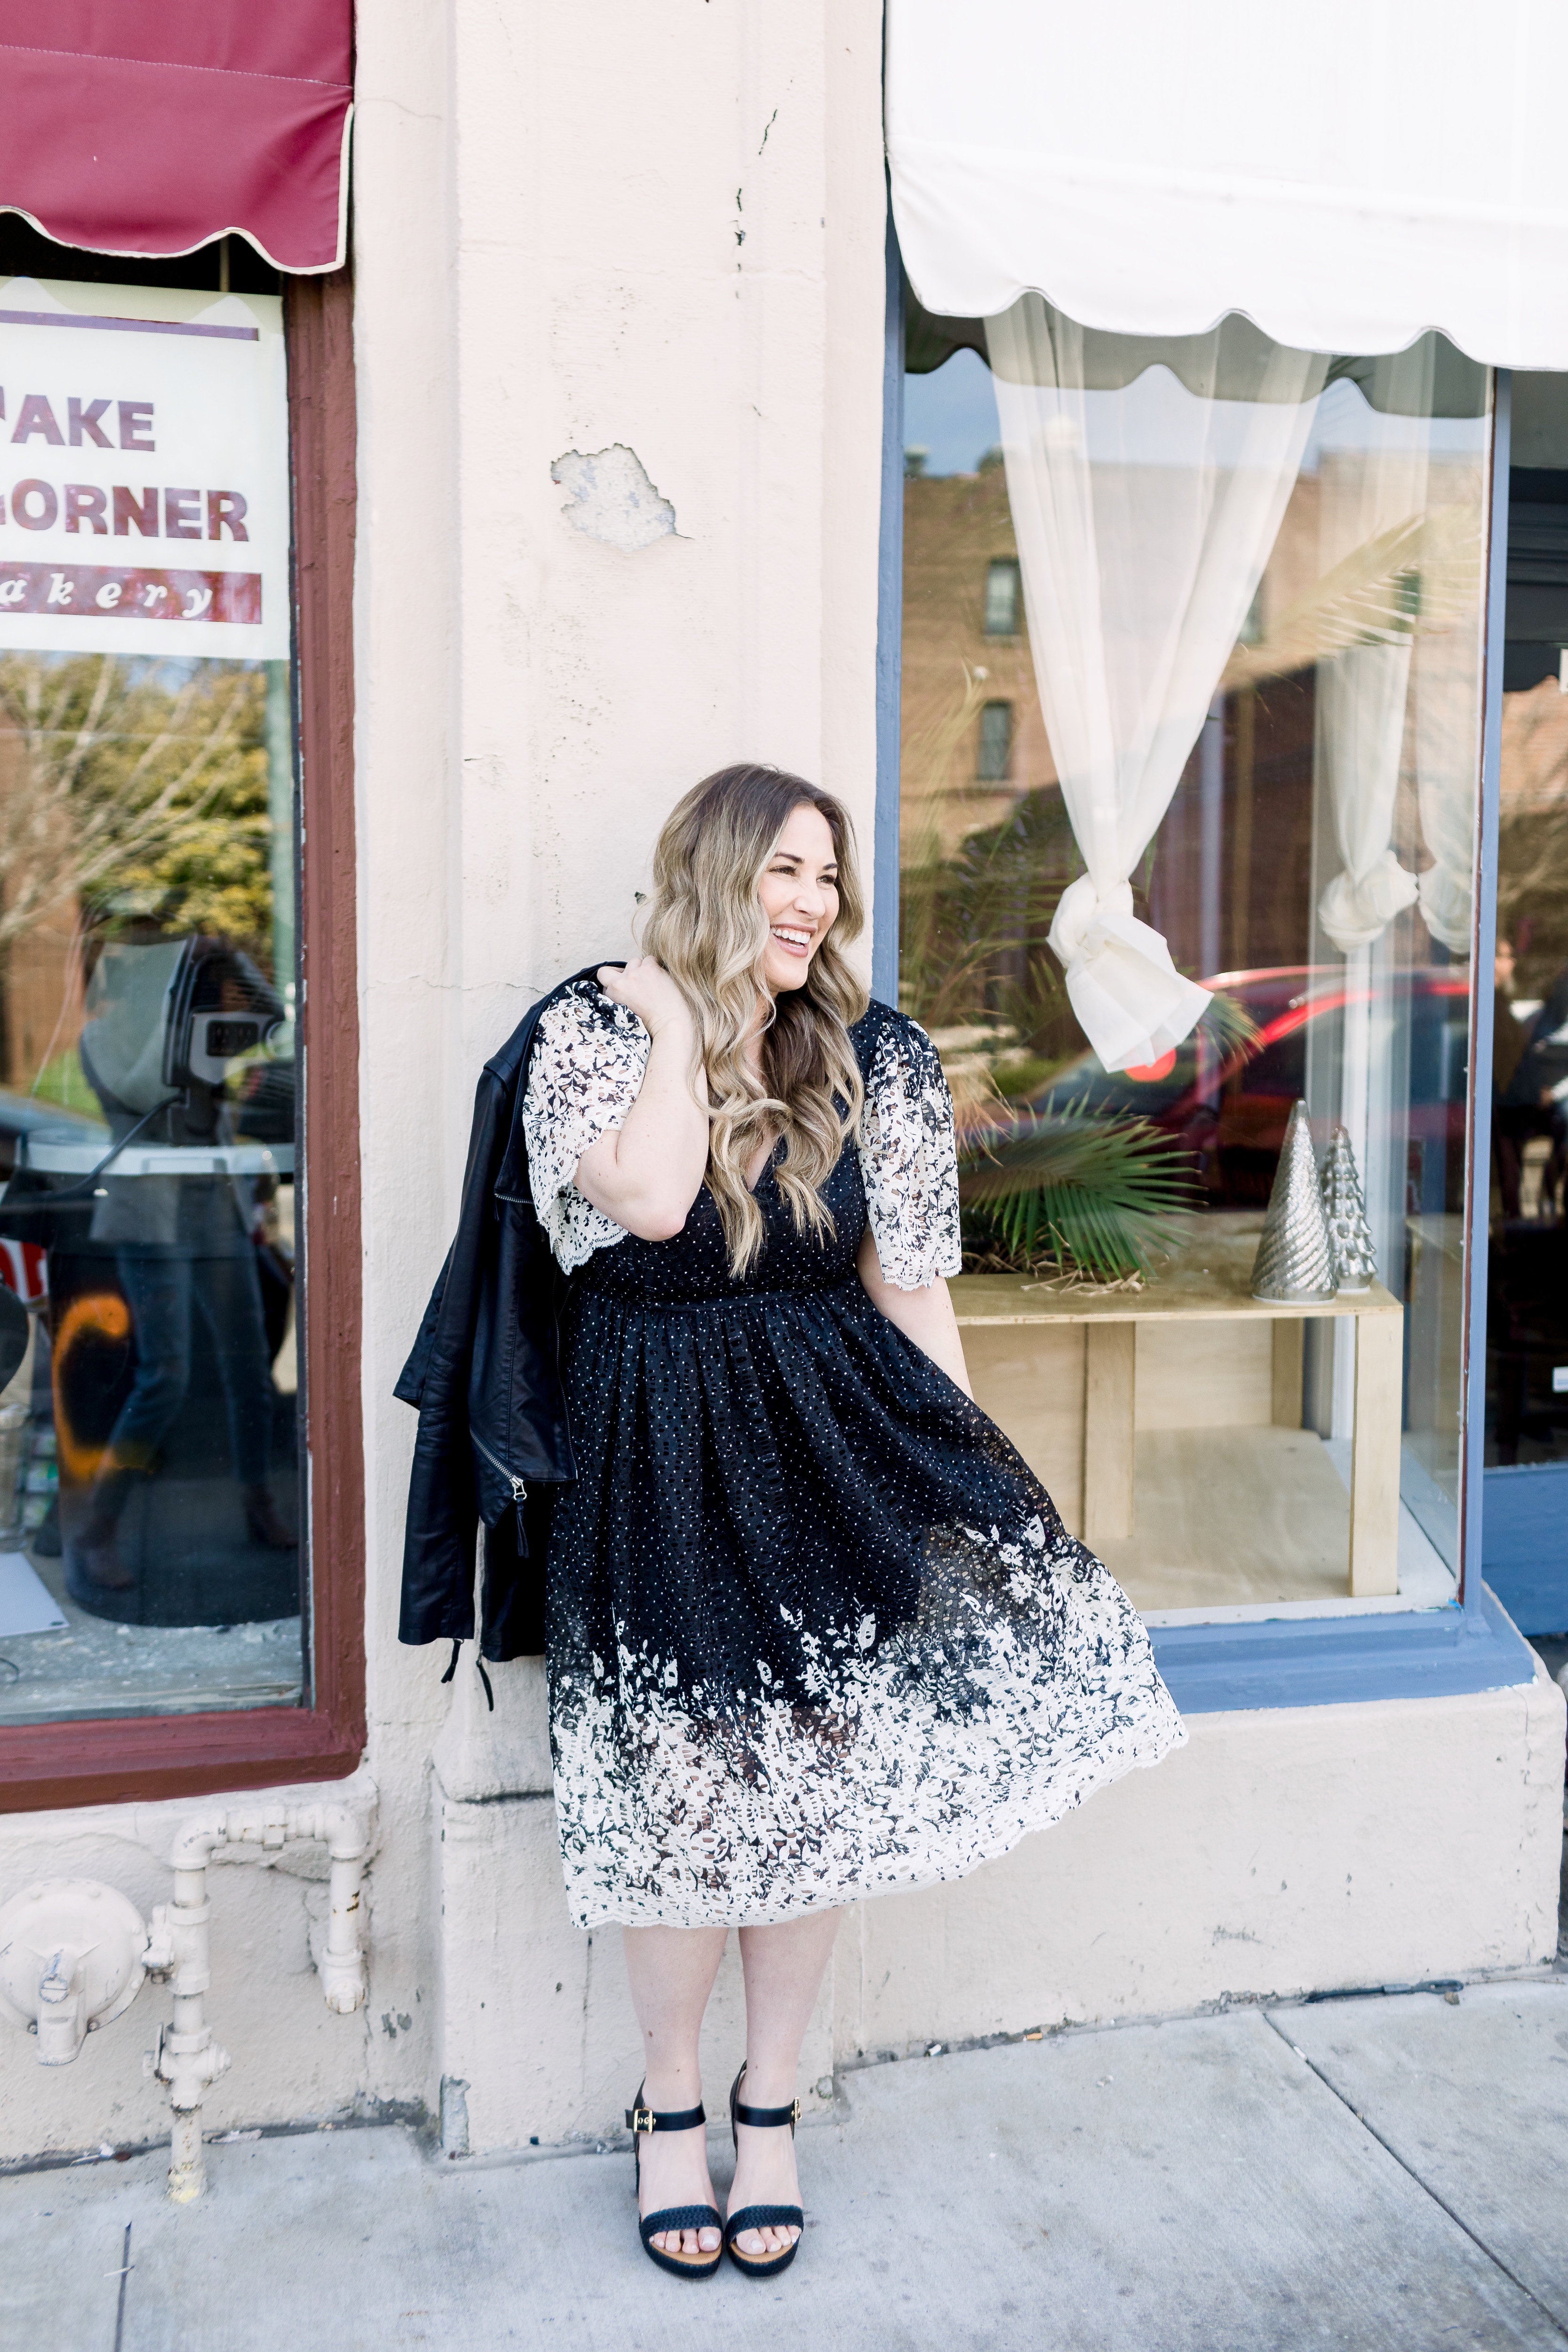 How to wear black in the spring, styling tips featured by top Memphis fashion blog, Walking in Memphis in High Heels: image of a woman wearing a black and white Eliza J lace dress, Levi’s faux leather Moto jacket, RAID platform sandals.